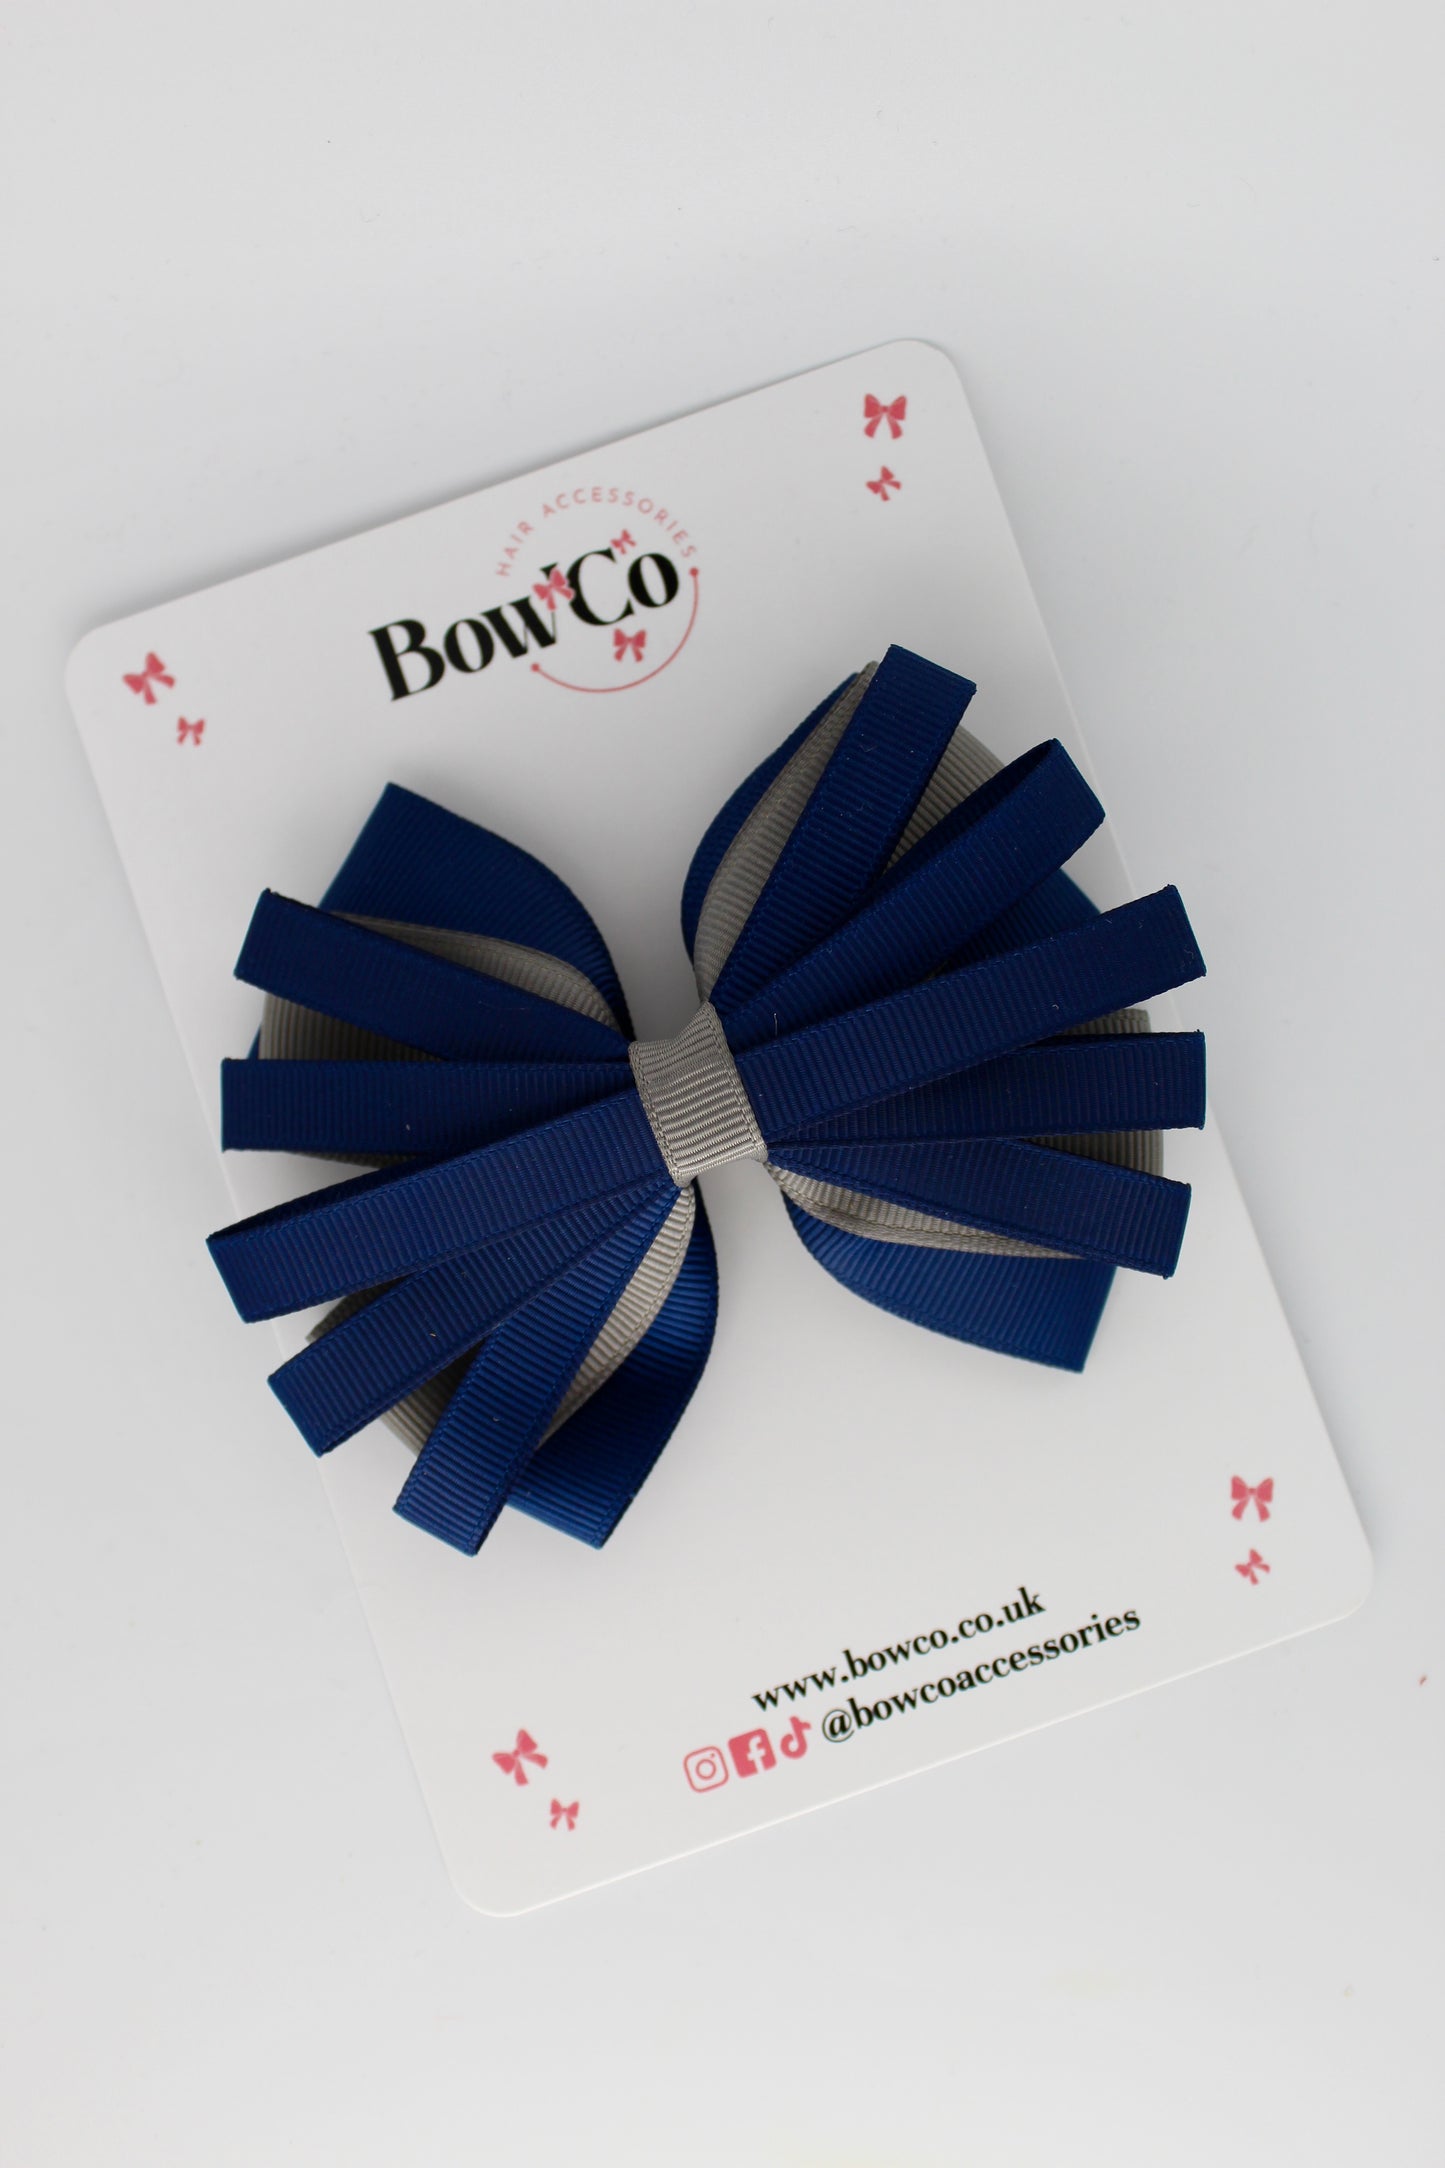 4 Inch Spiral Bow - 4 Inches - Clip - Navy Blue and Metal Grey